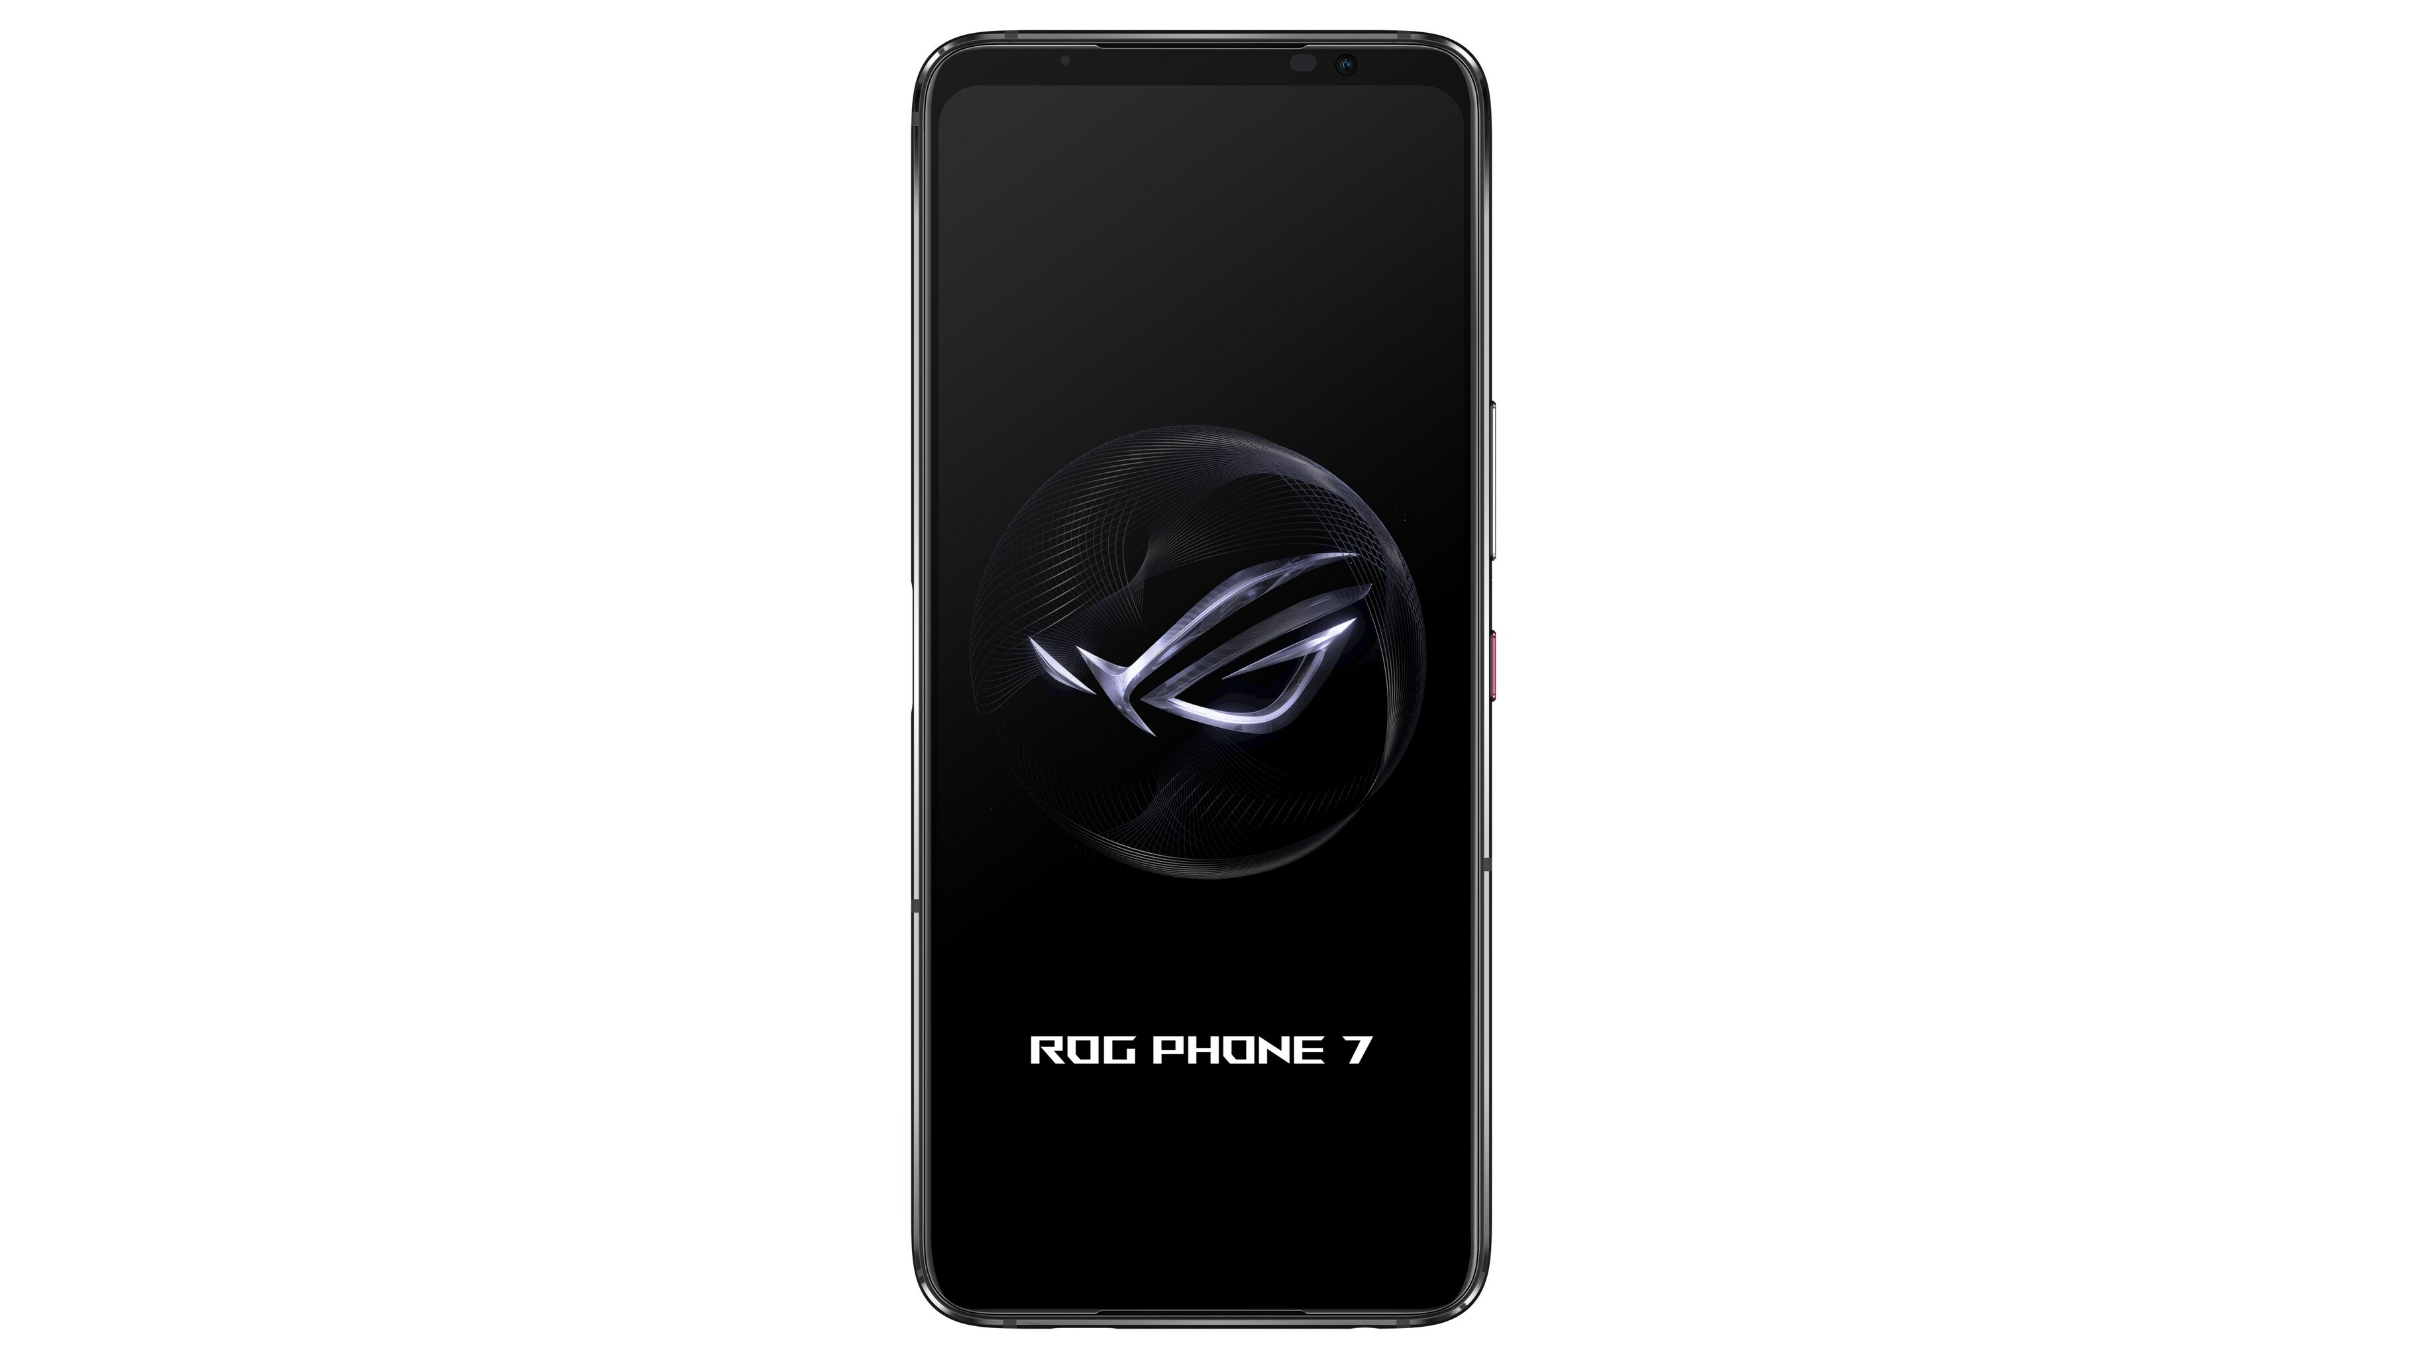 A leaked image of the Asus ROG Phone 7